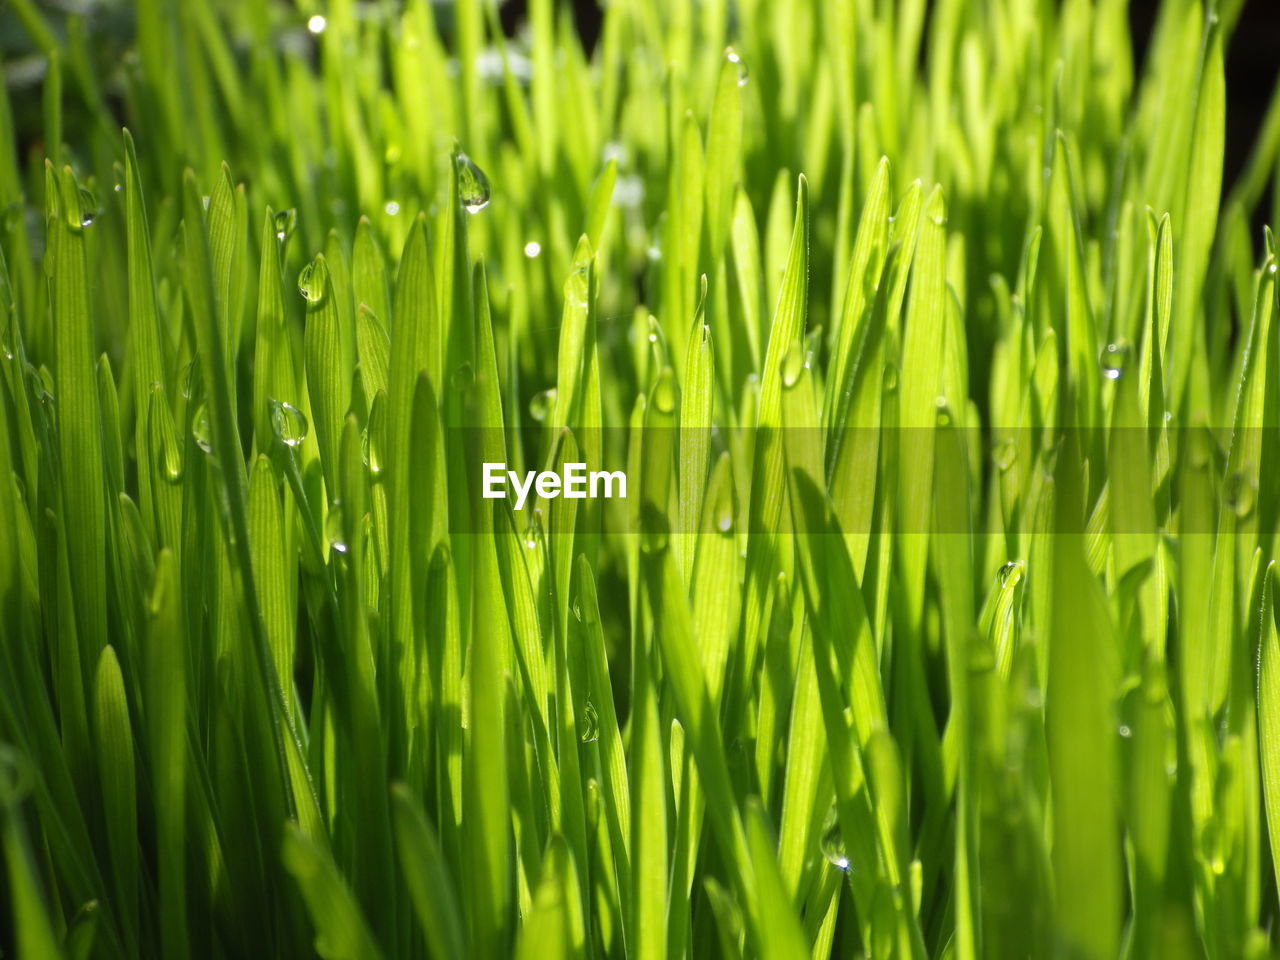 green, plant, growth, nature, grass, beauty in nature, backgrounds, grassland, lawn, full frame, field, no people, land, plant stem, drop, freshness, wheatgrass, wet, close-up, water, meadow, day, blade of grass, outdoors, agriculture, selective focus, tranquility, leaf, sunlight, crop, focus on foreground, rural scene, lush foliage, foliage, landscape, environment